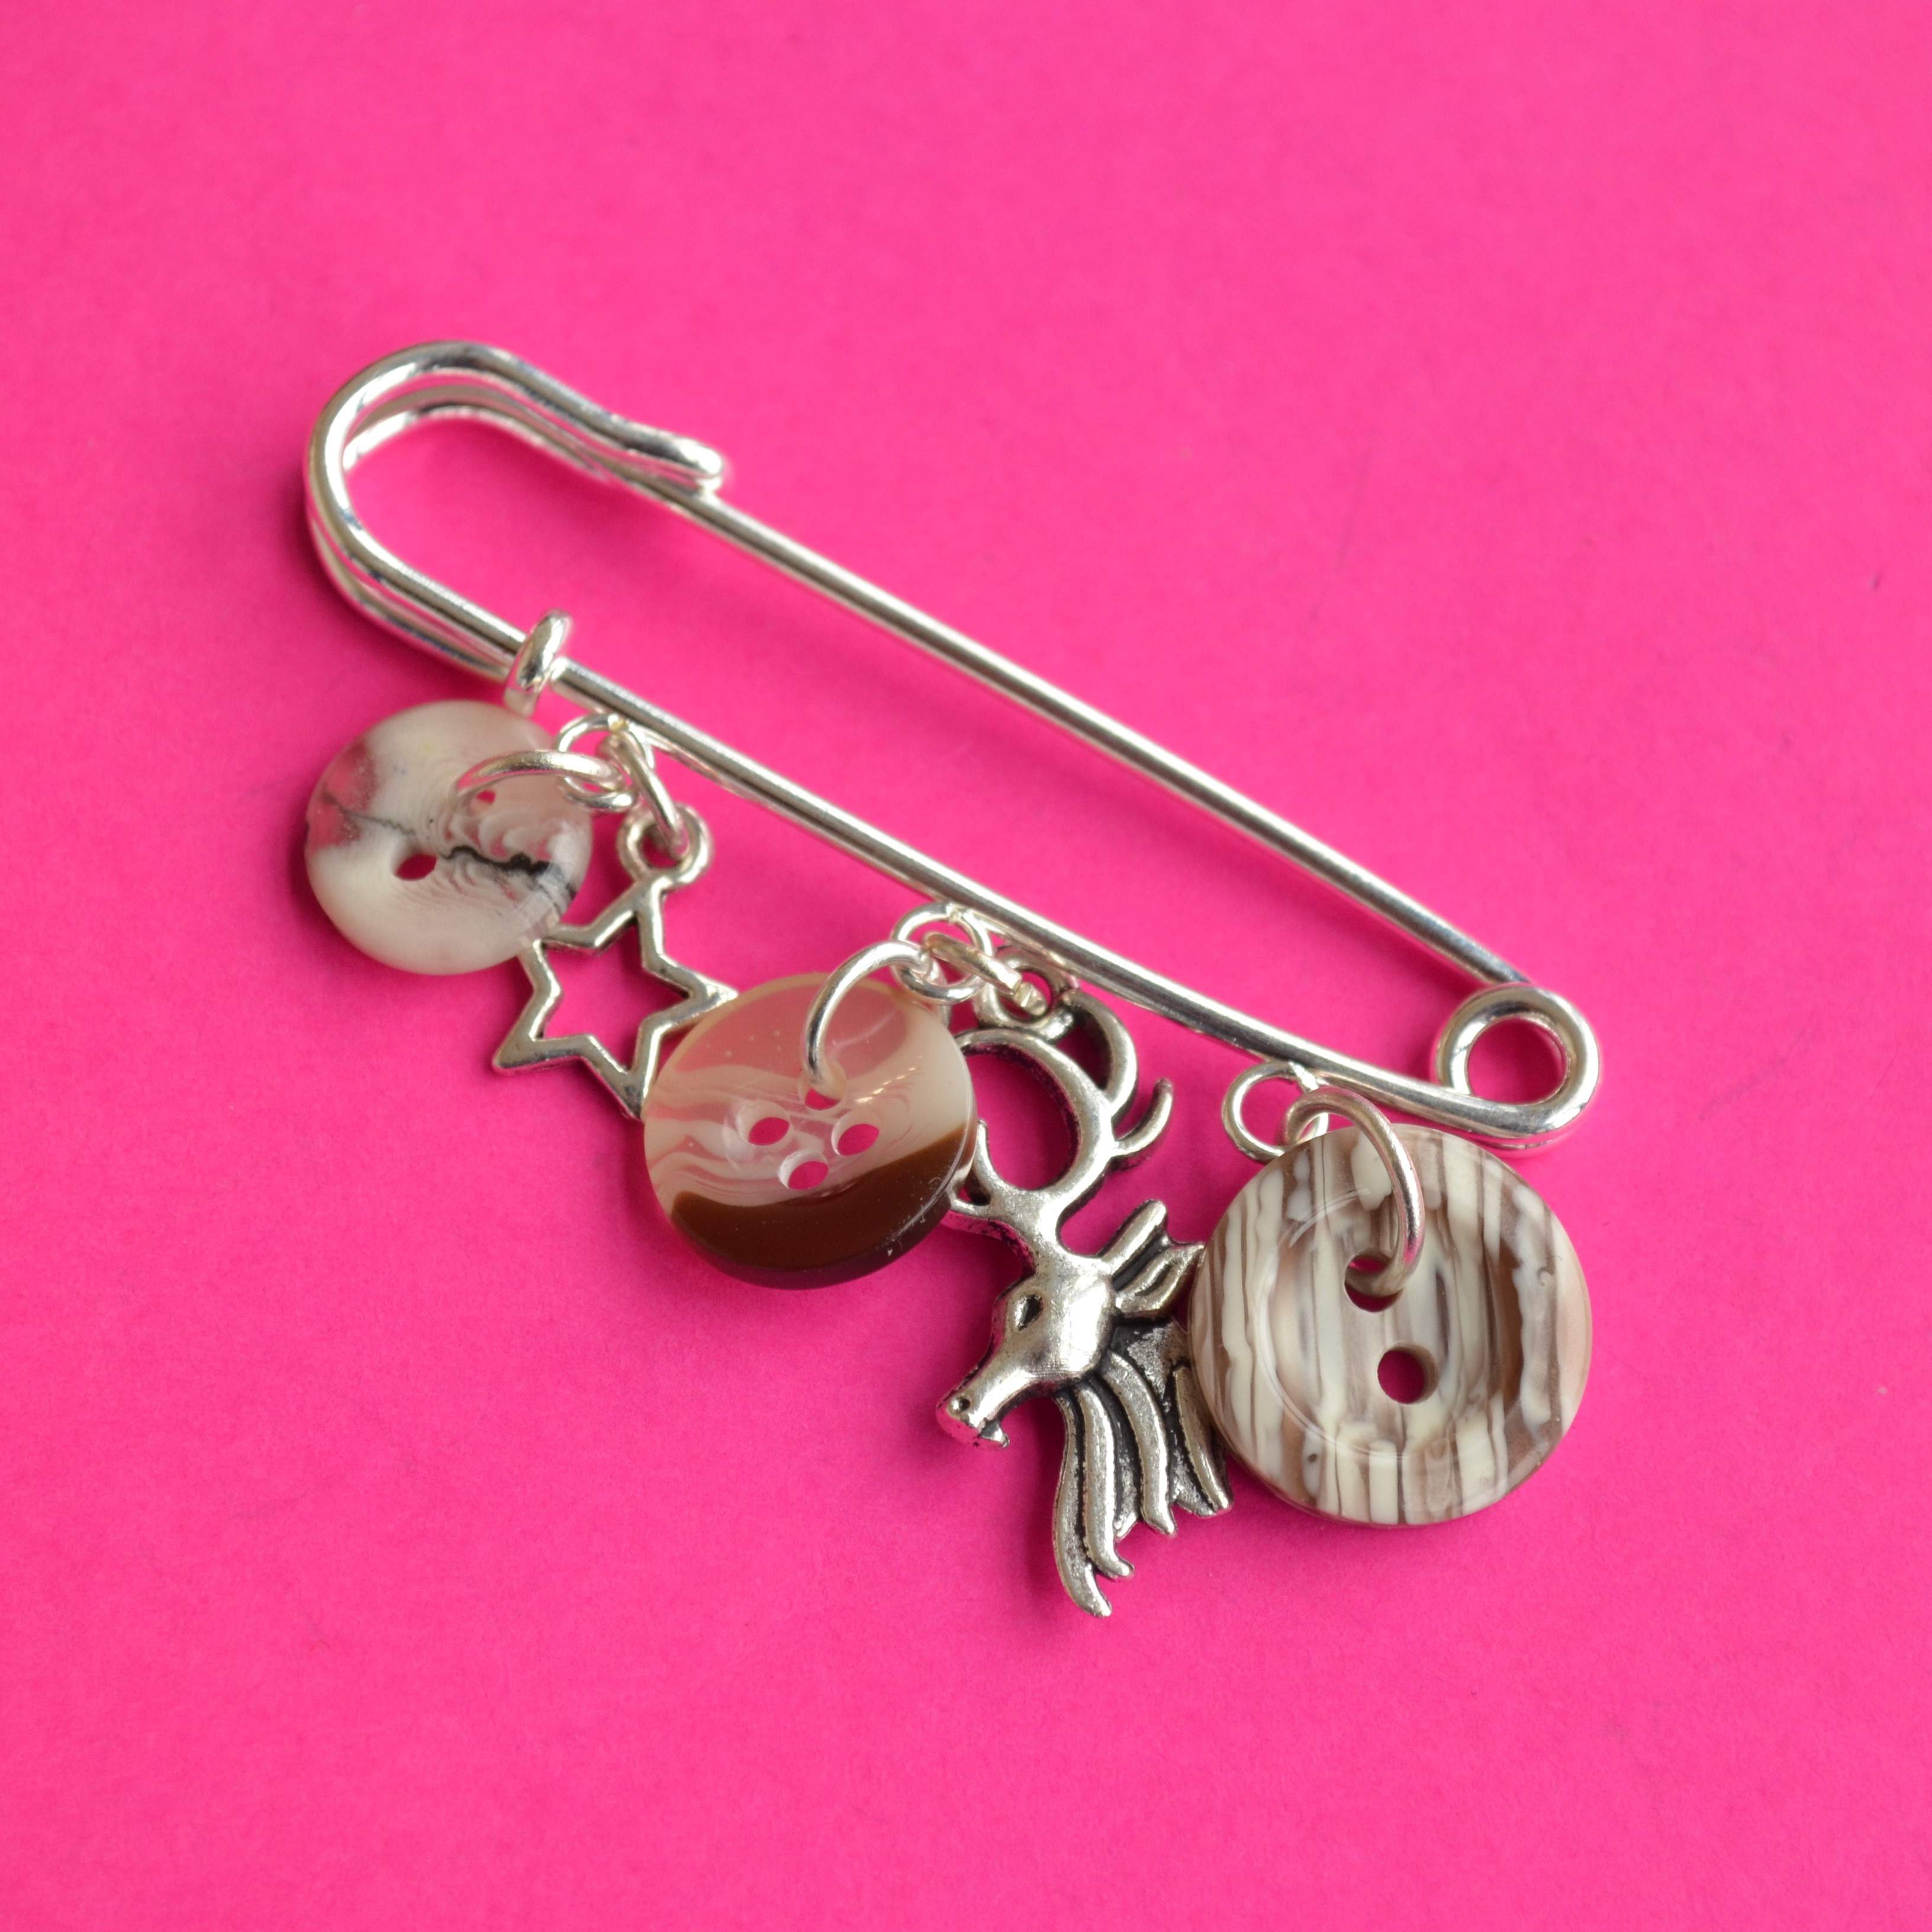 Stag Wee Charm Kilt Pin Brooch